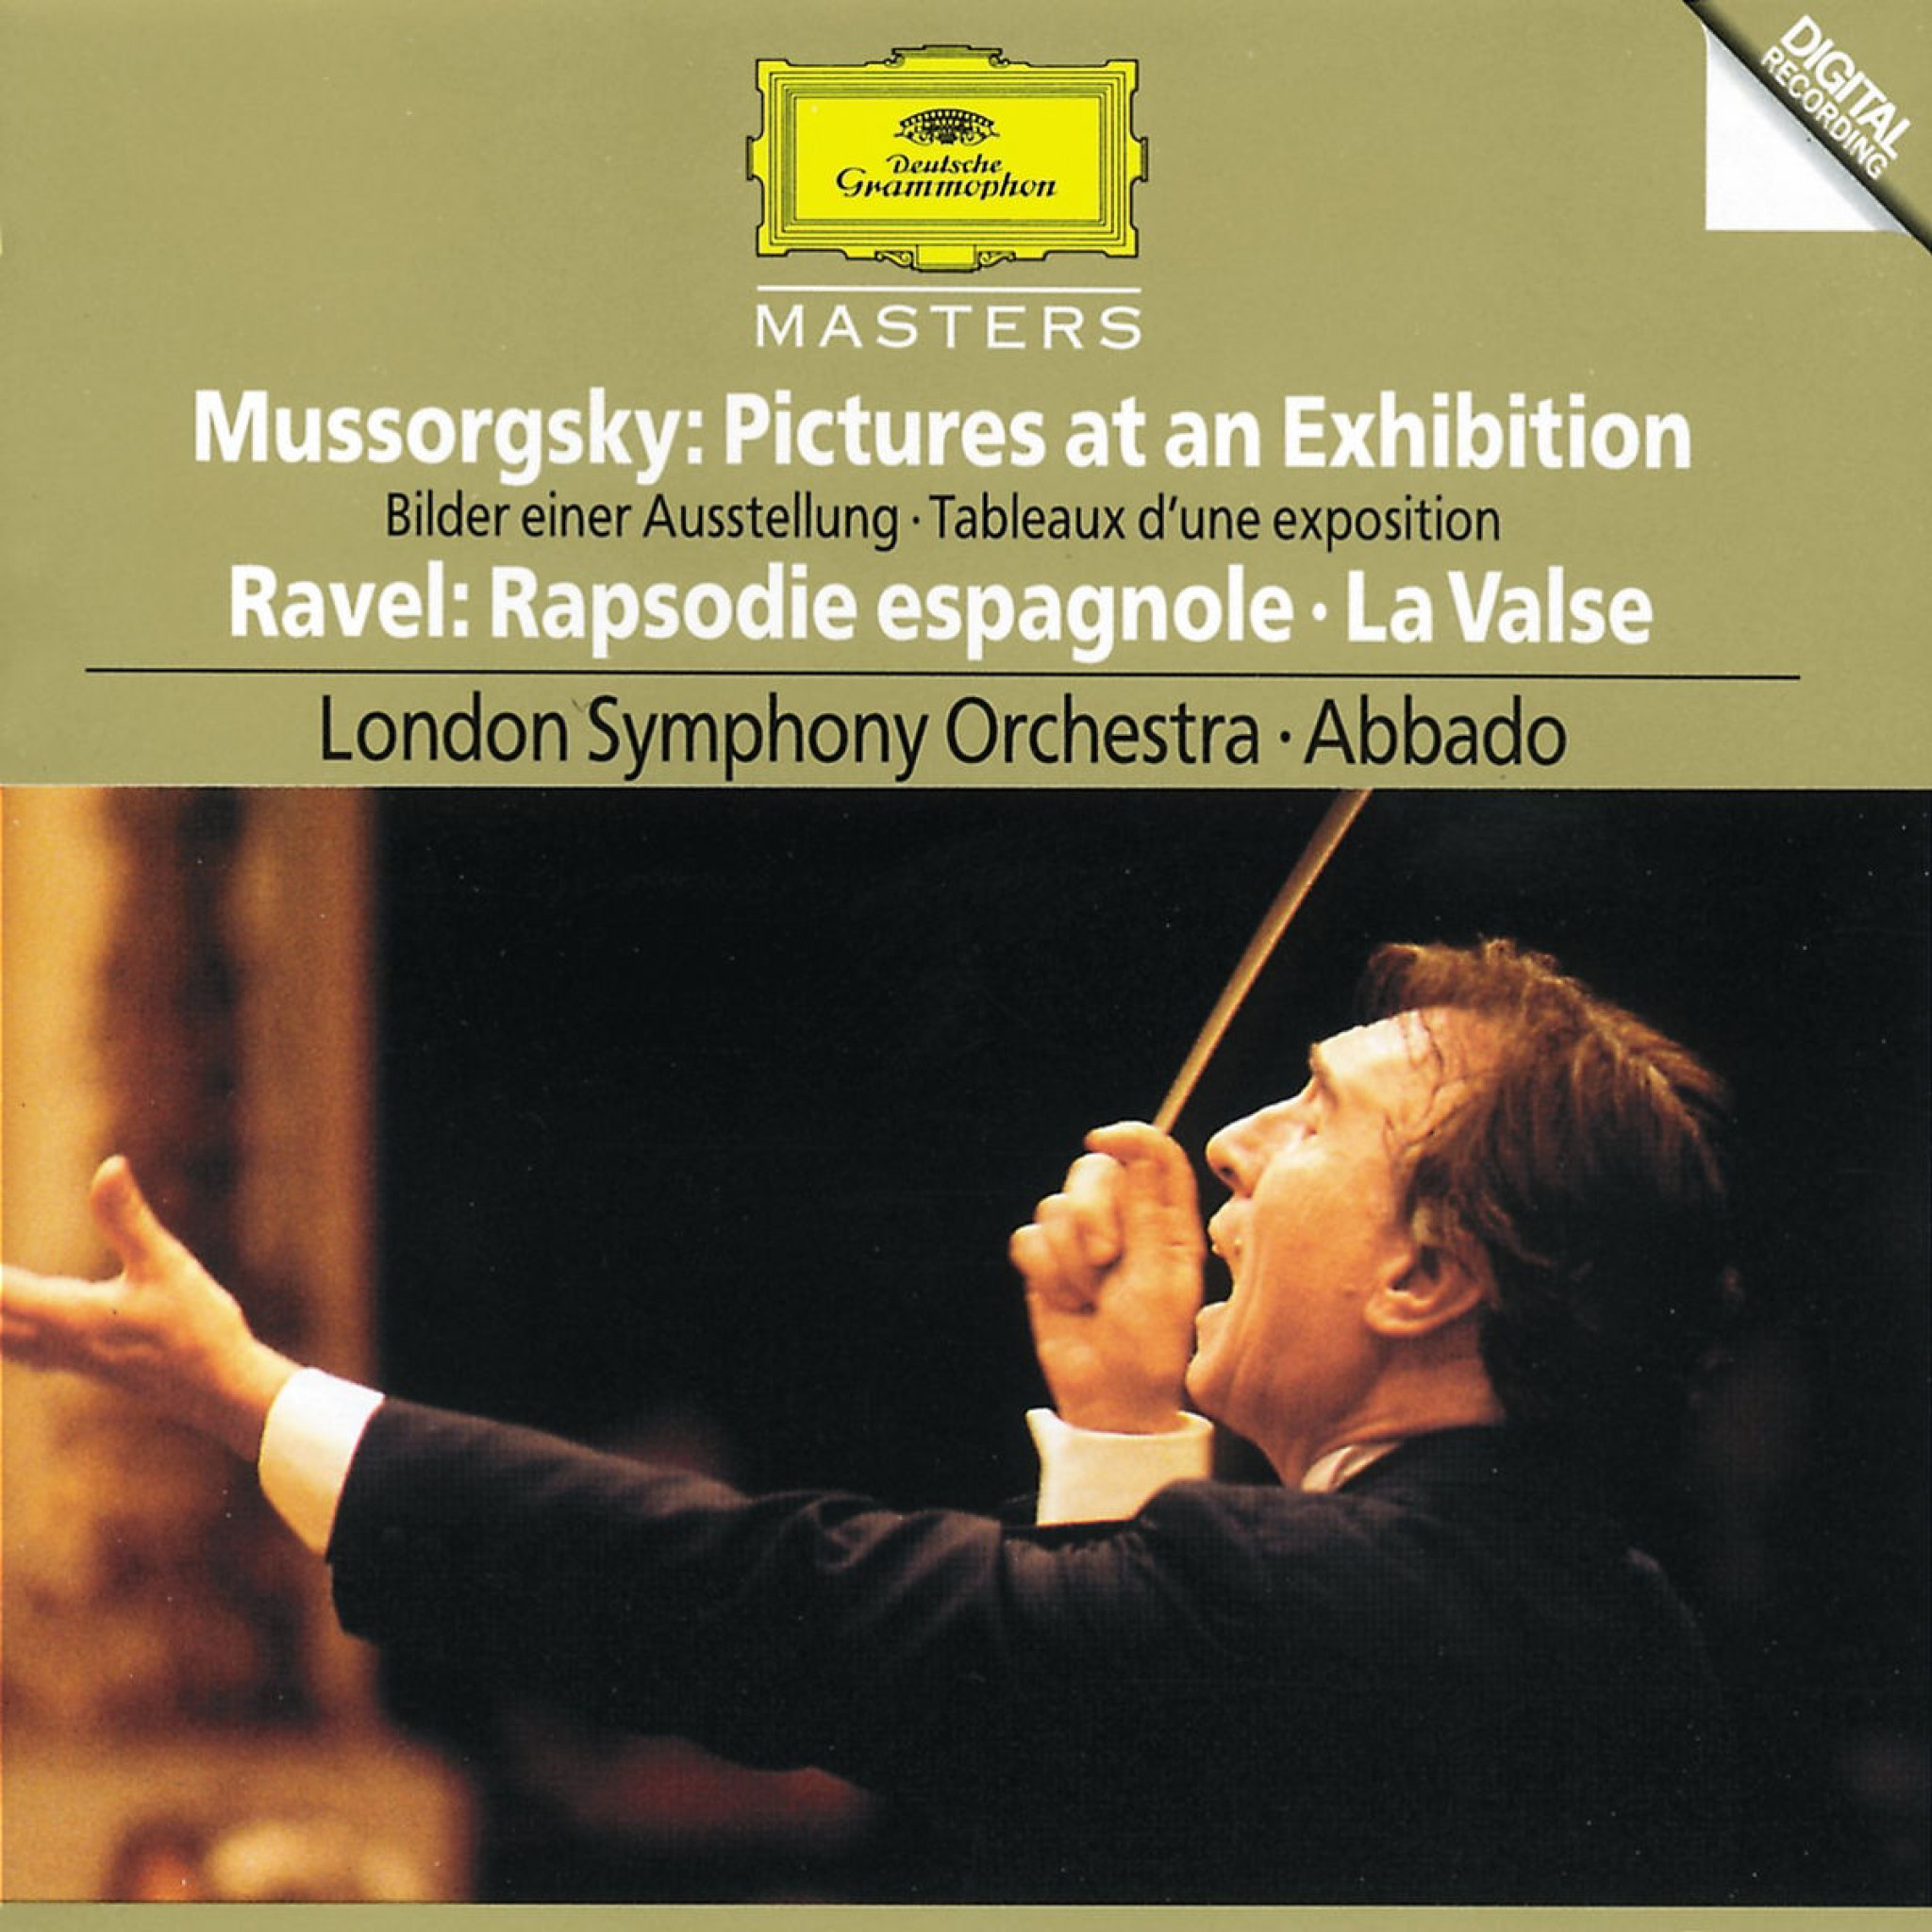 Mussorgsky: Pictures at an Exhibition 0028944555622